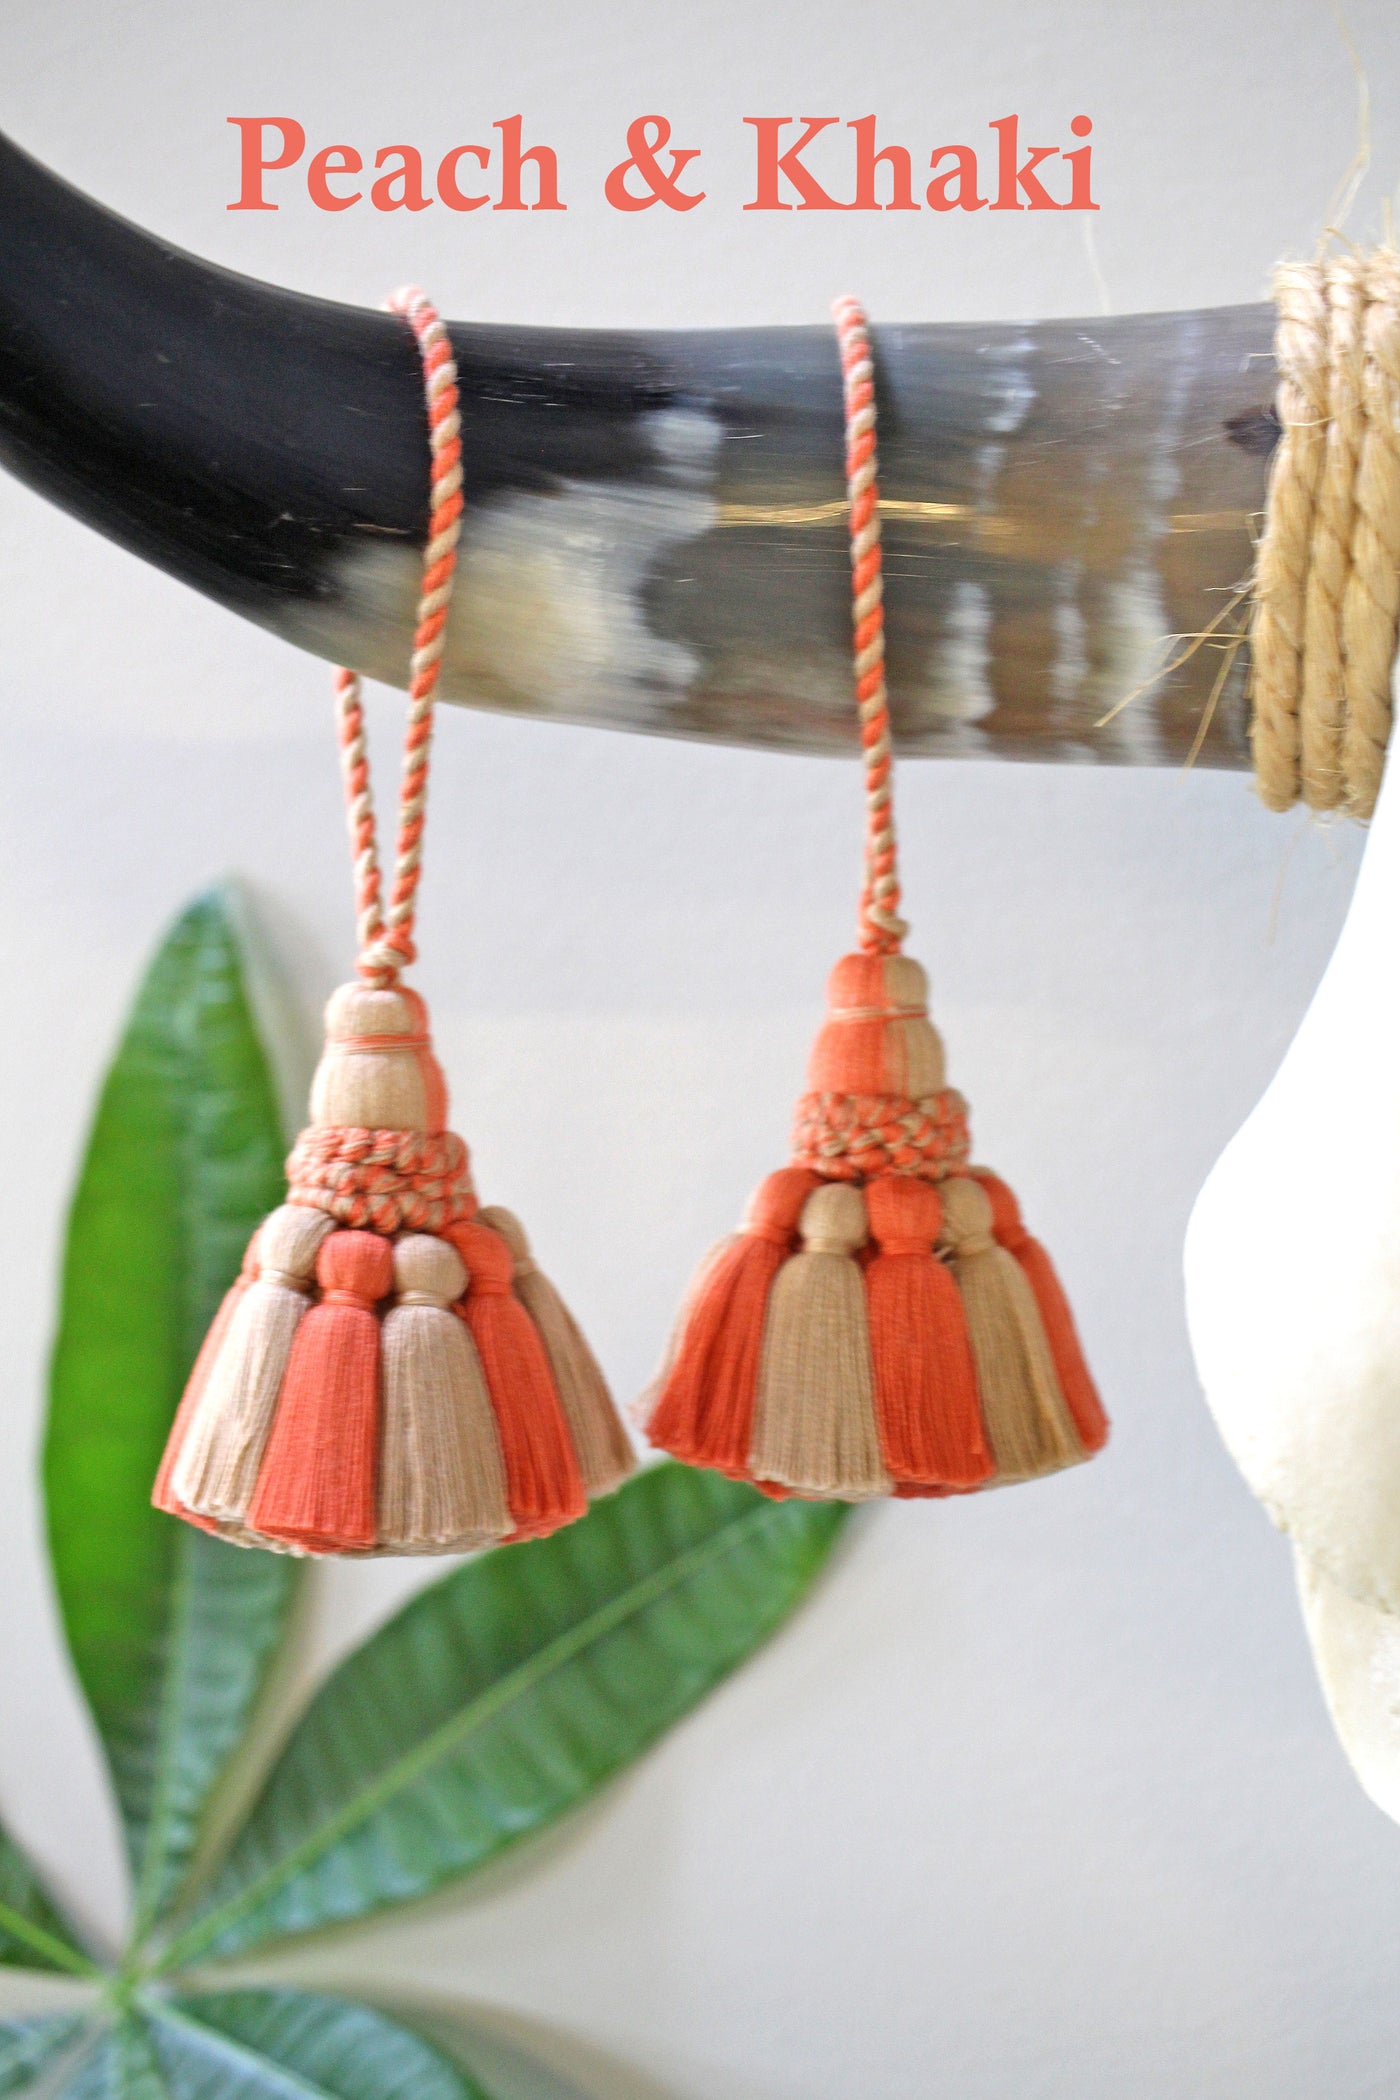 Temple Belle Home Decor Tassels, Purse Charms, Bag Swag, Artisan Made, 7"